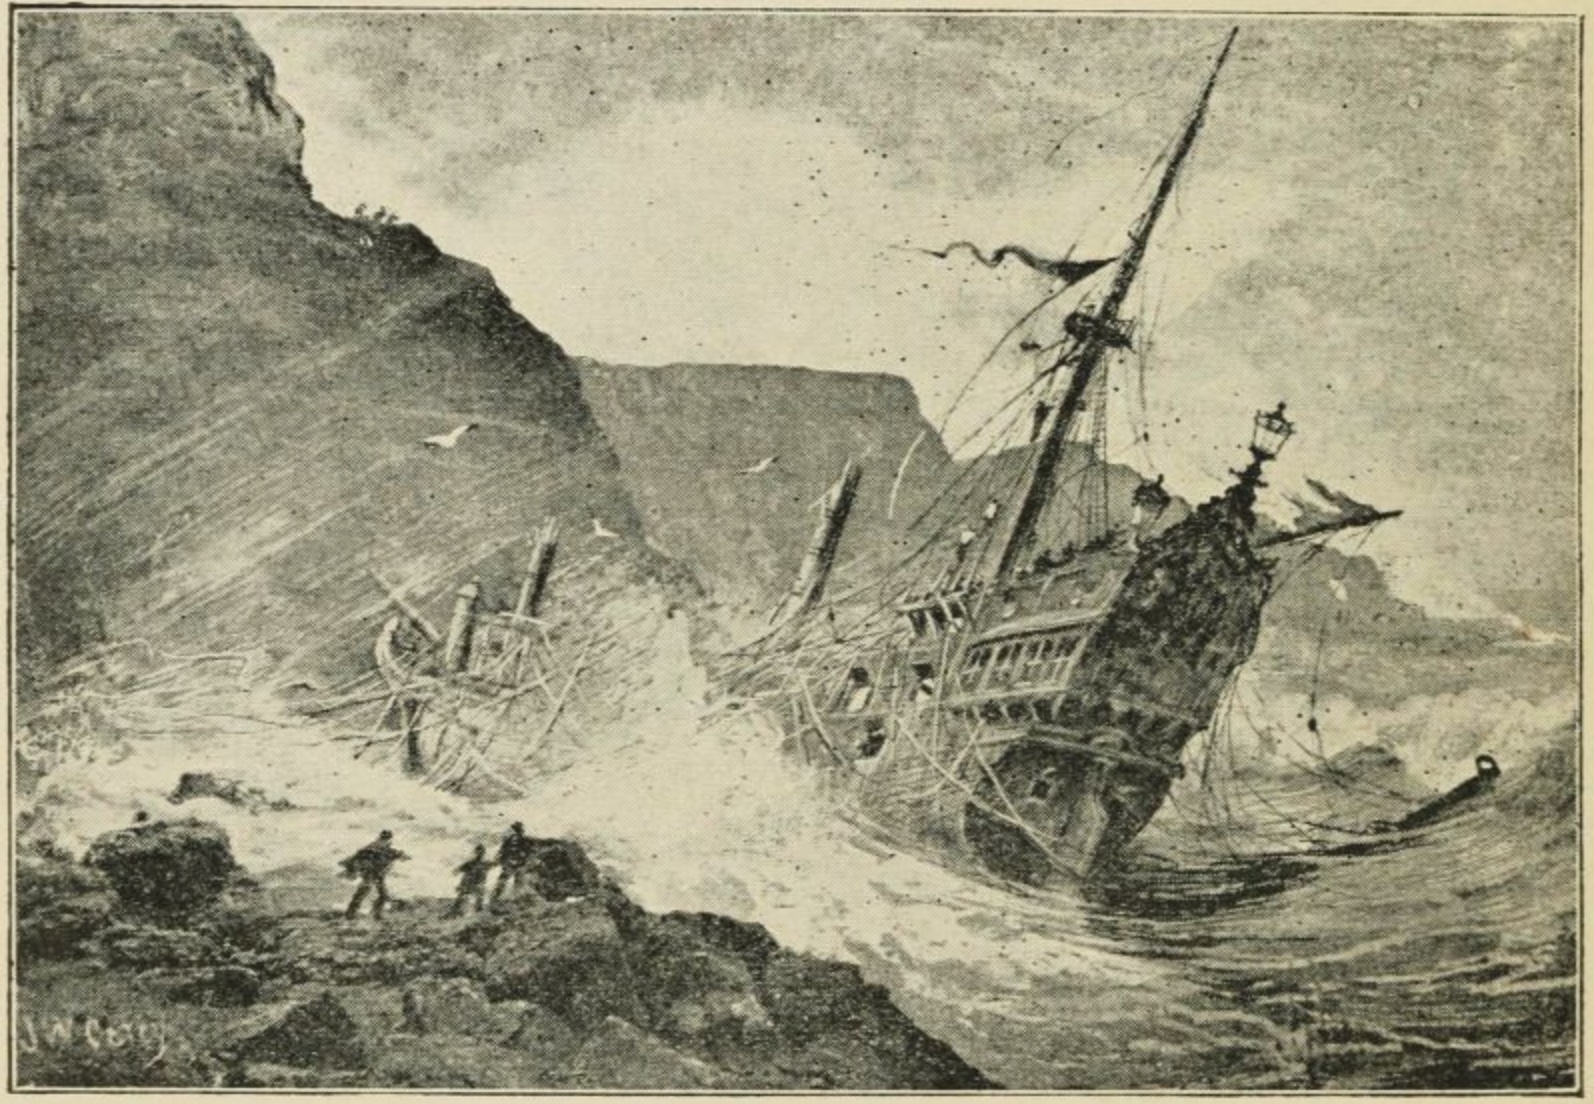 19th-century engraving depicts a Spanish Galleon shipwreck at Port-Na Spaniagh, 1588. Lacada Point and the Spanish Rocks are in the background